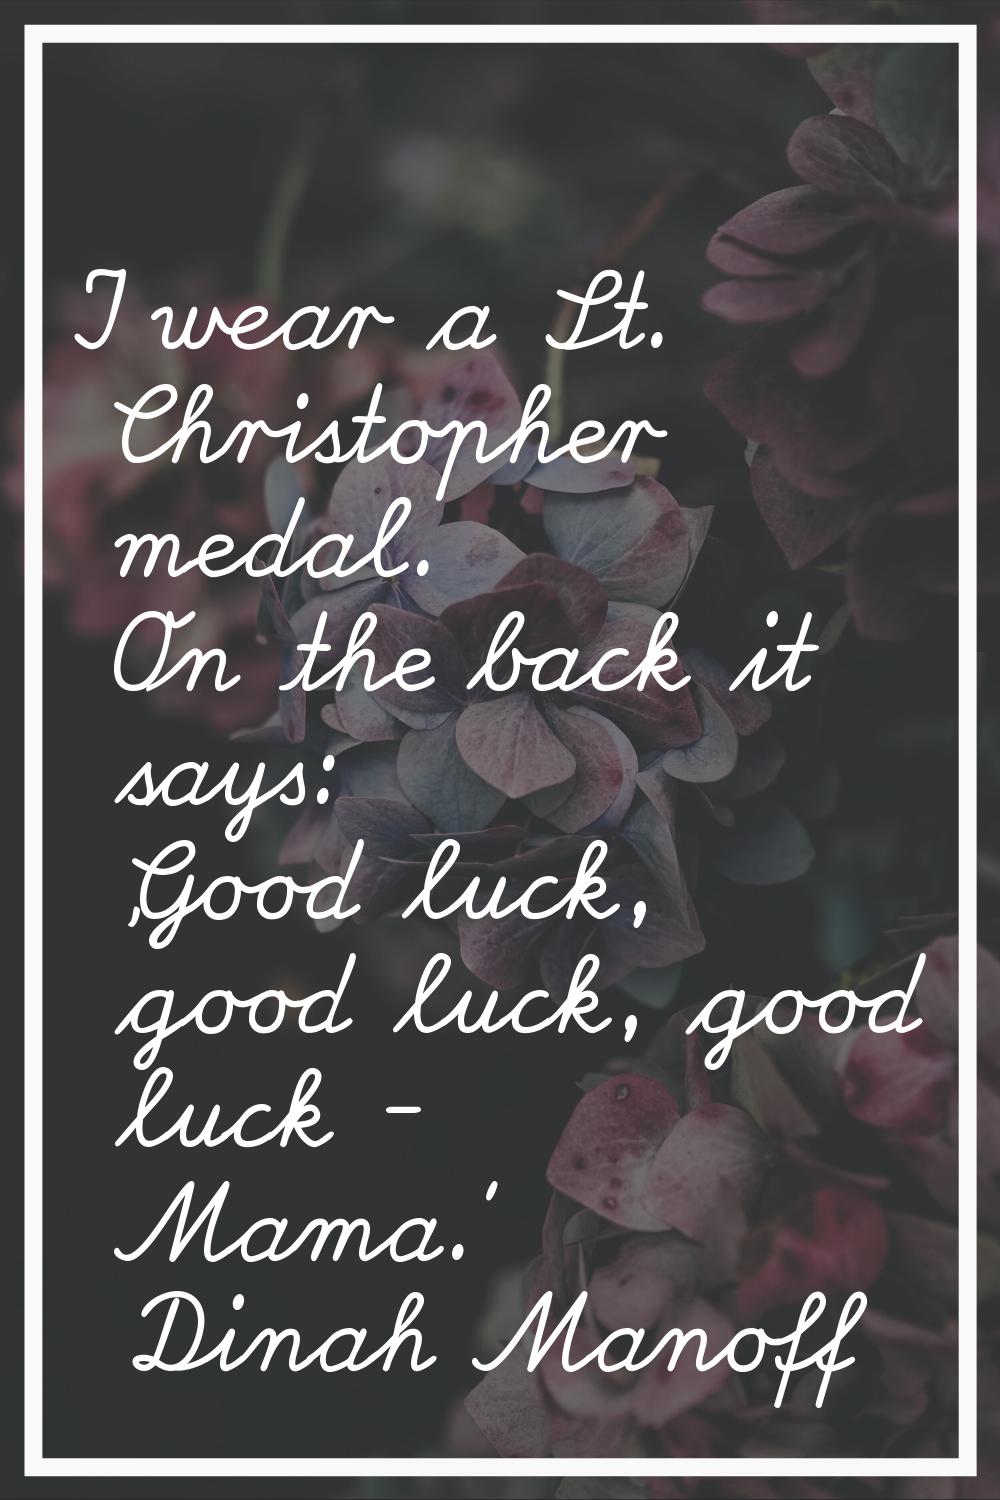 I wear a St. Christopher medal. On the back it says: 'Good luck, good luck, good luck - Mama.'